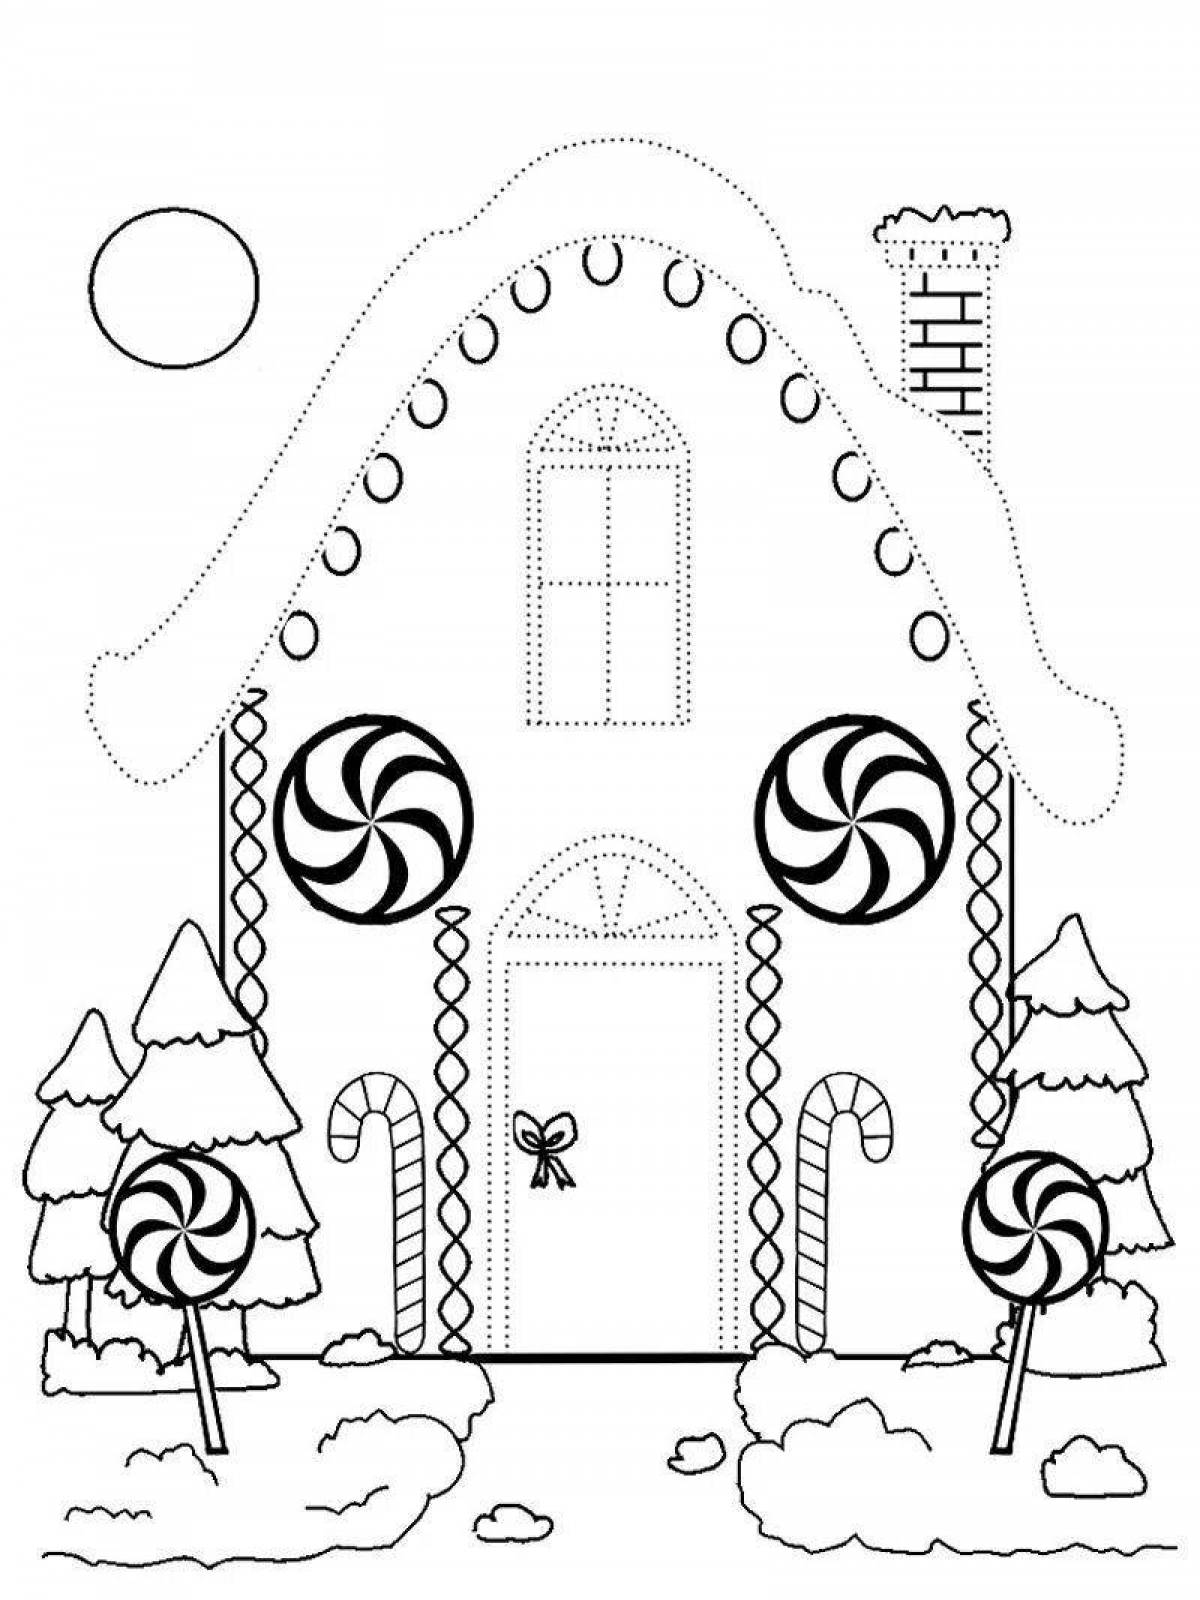 Playful coloring fairytale gingerbread house